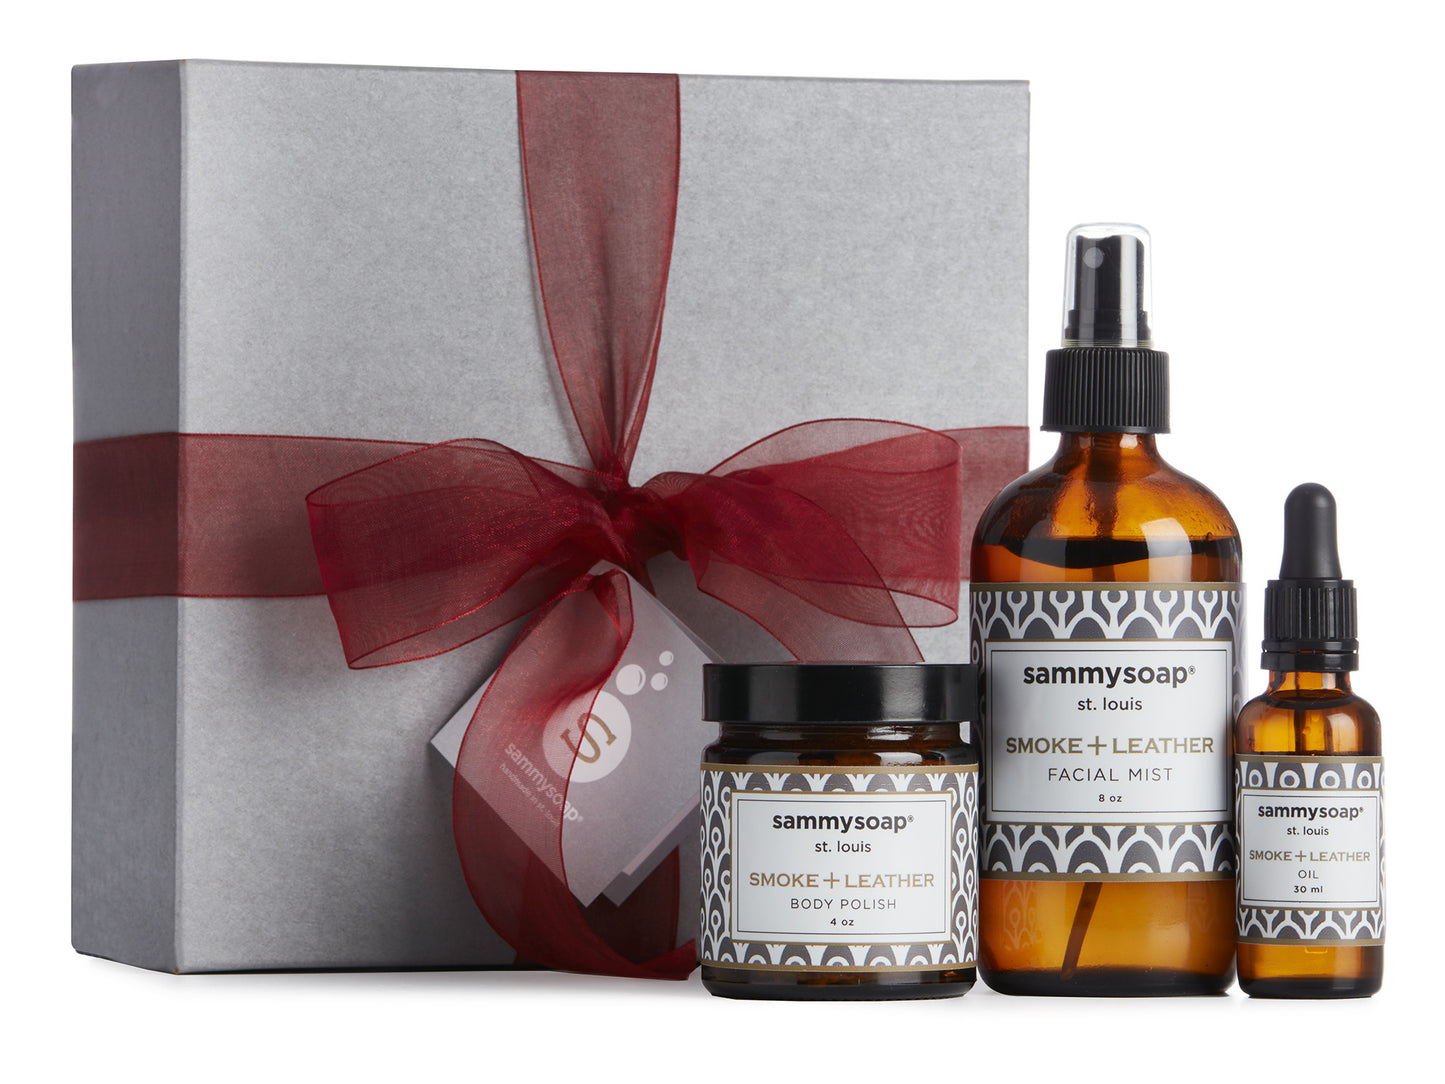 Smoke + Leather Collection Gift Box: Body Polish, Facial Mist, and Body Oil